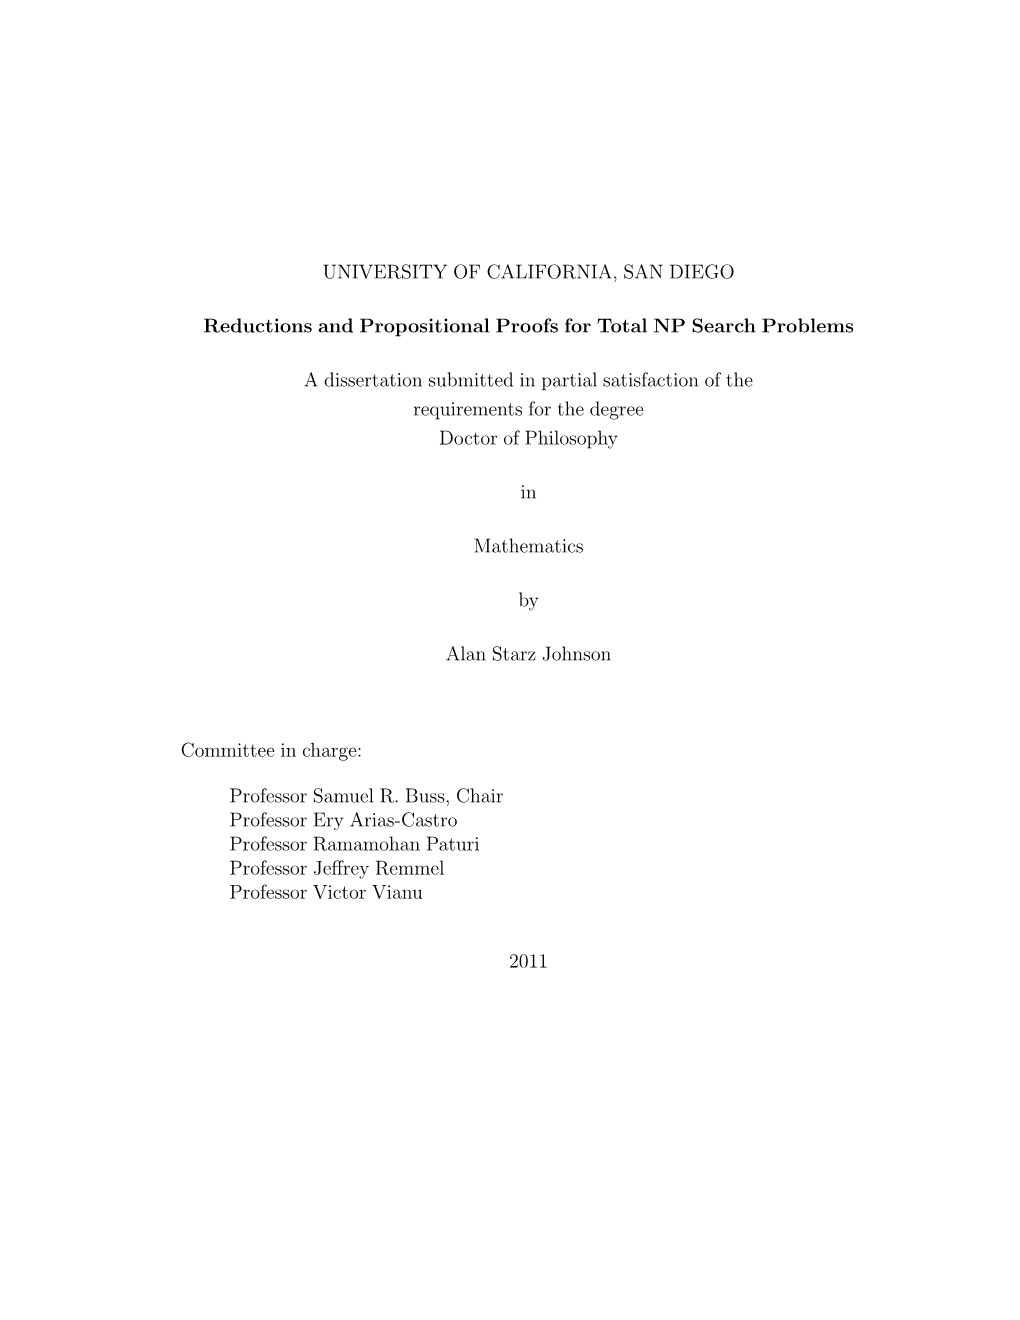 UNIVERSITY of CALIFORNIA, SAN DIEGO Reductions and Propositional Proofs for Total NP Search Problems a Dissertation Submitted In